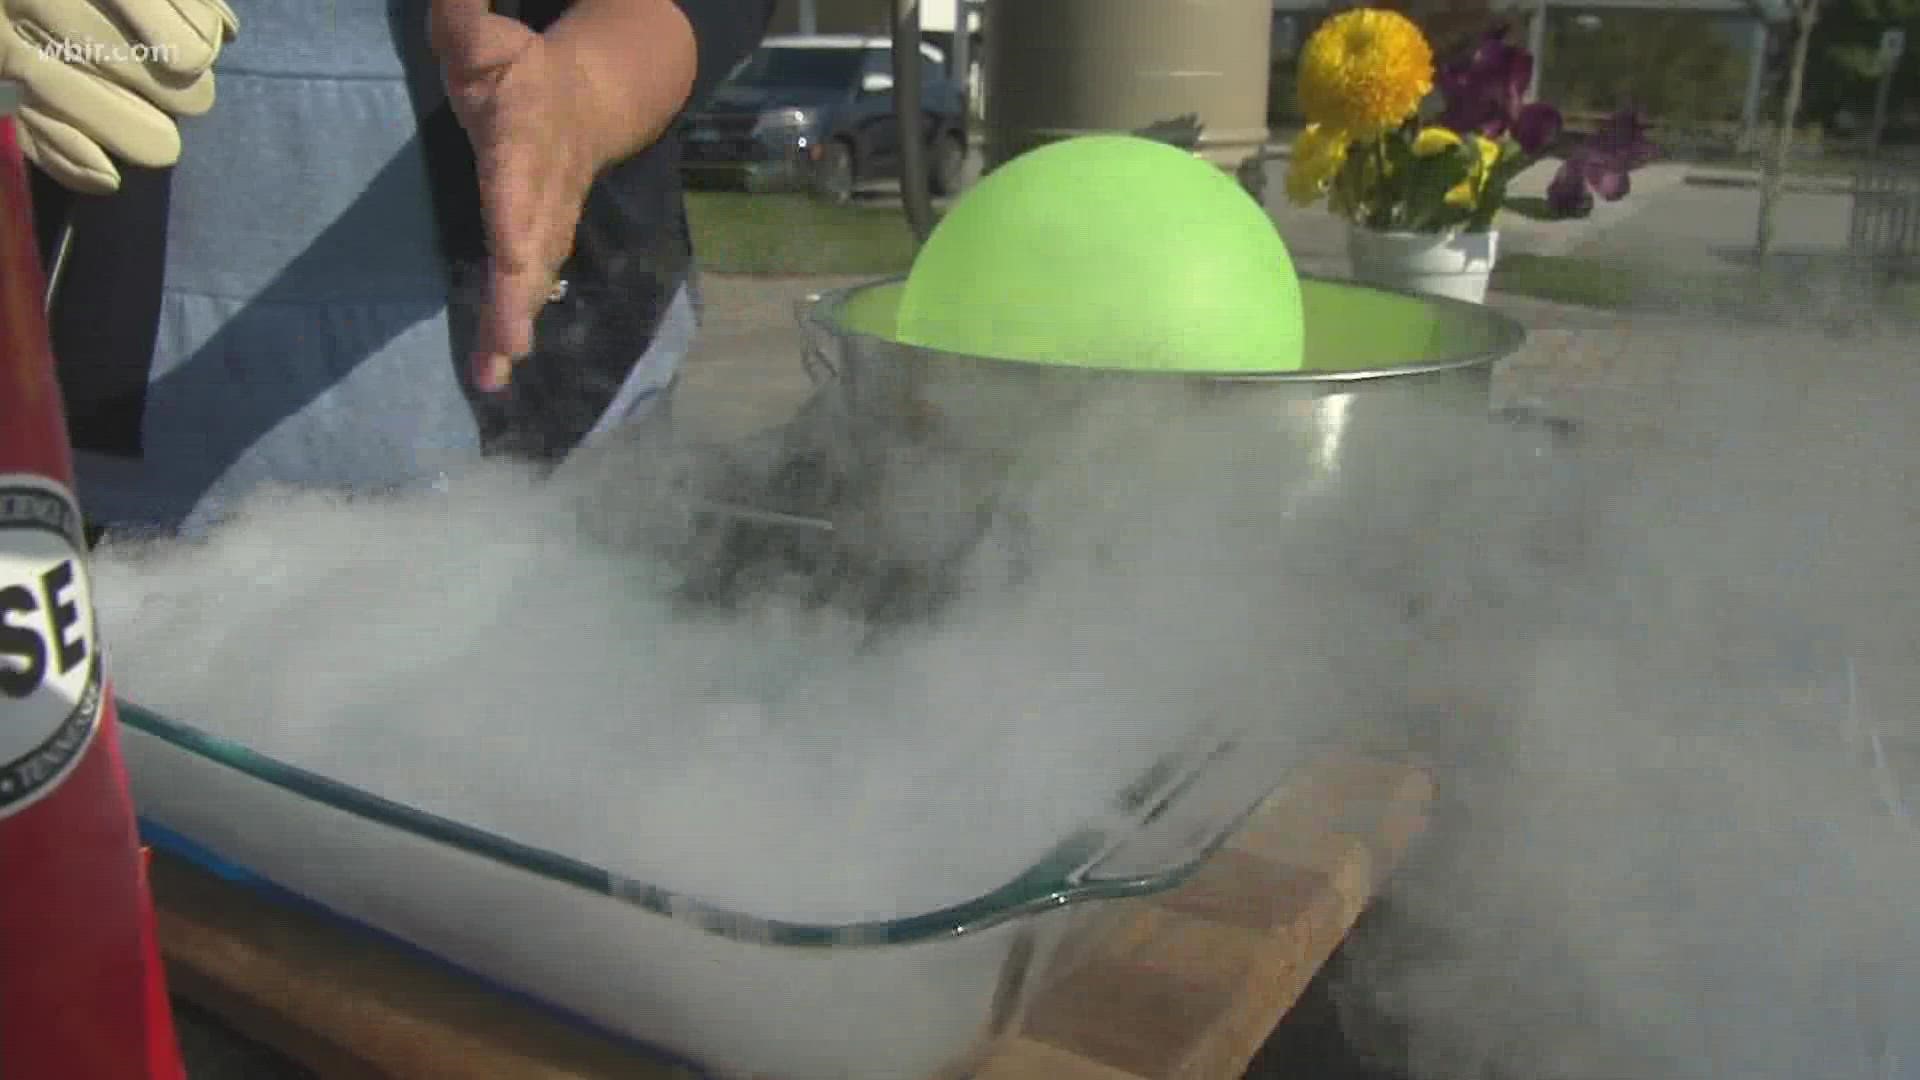 Shannon Smith joins up with AMSE to do a science experiment with liquid nitrogen.